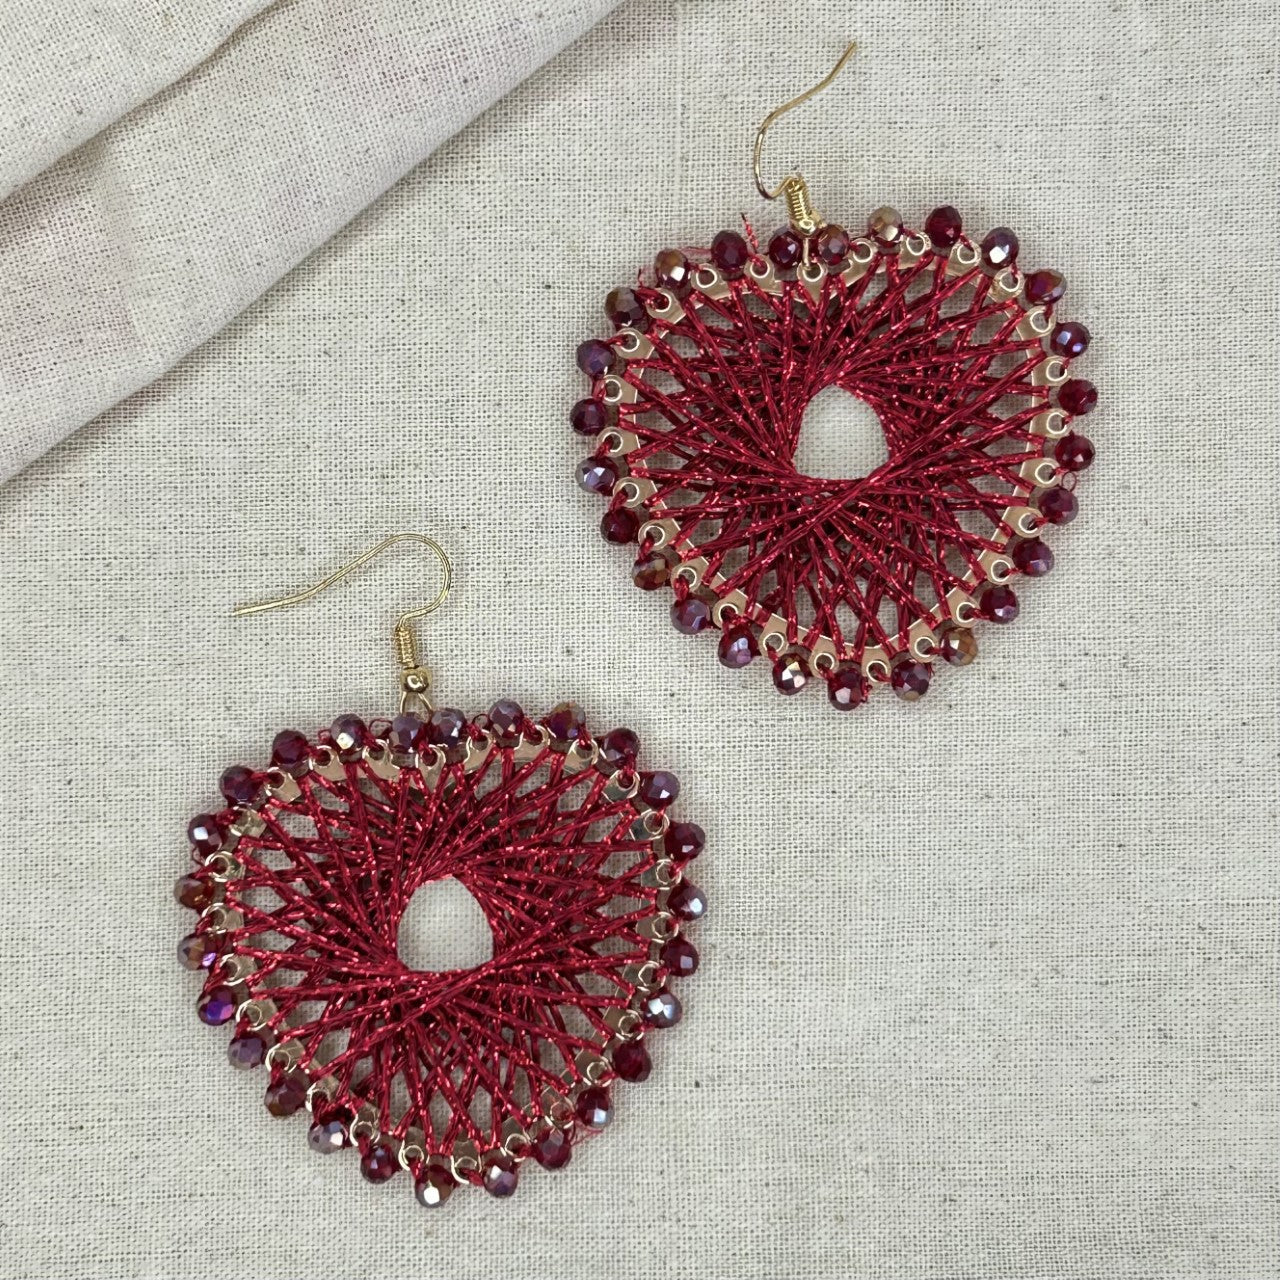 Angelco Accessories Colour burst heart earrings on linen background - red